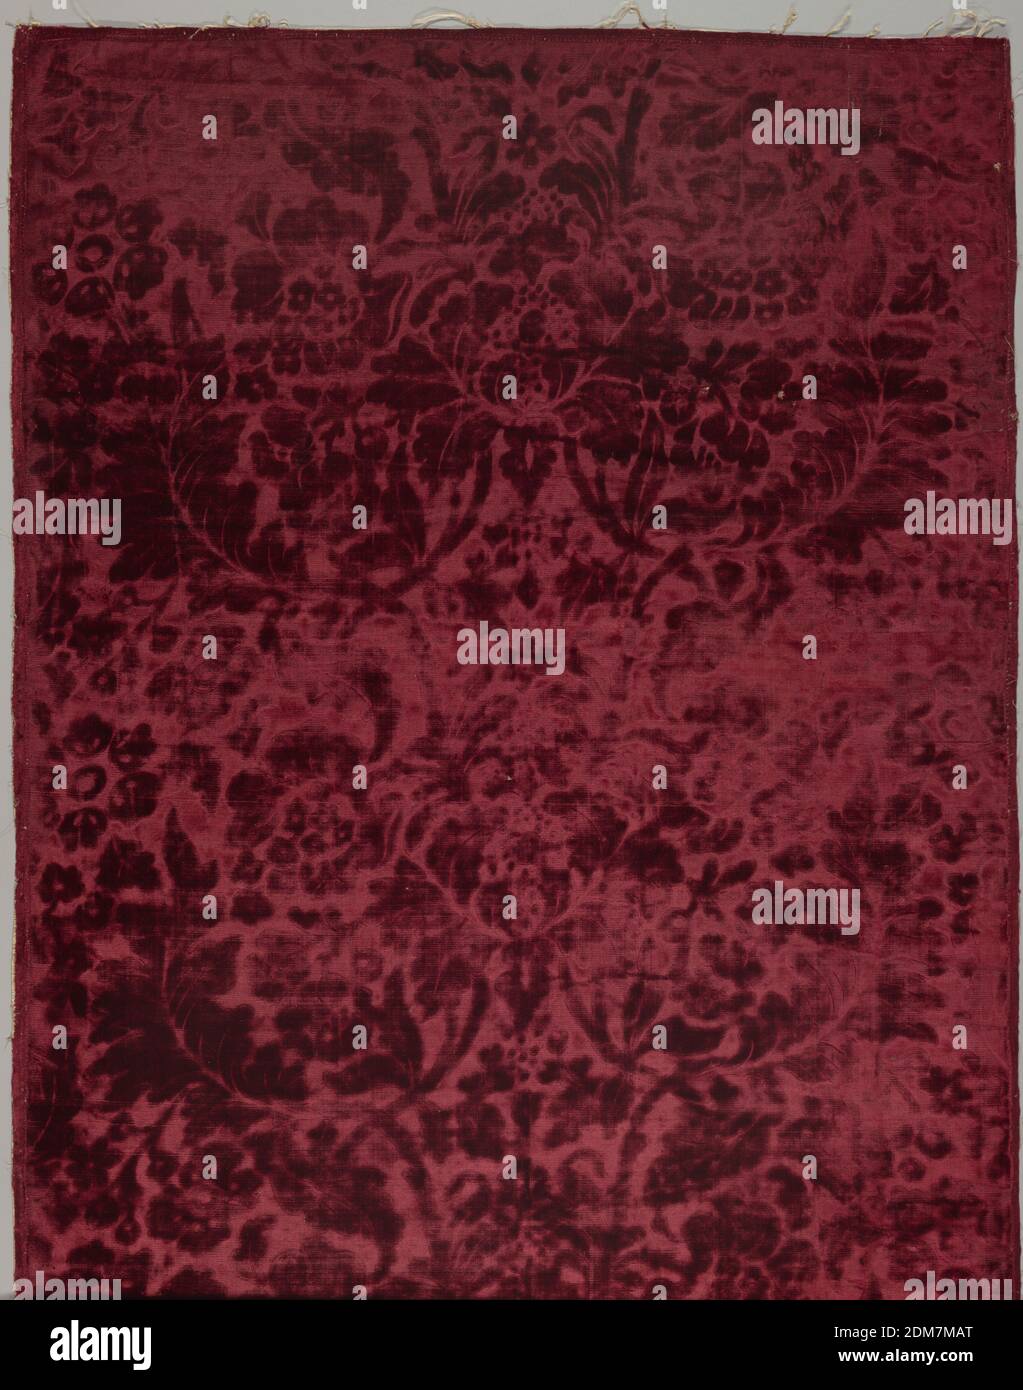 Fragment, Medium: silk Technique: embossed cut velvet, Rectangle of so-called frappe velvet in deep ruby with naturalistic design of flowers closely surrounded by plumelike leafage, rising slightly above pressed ground. Selvages appear to have been cutt off. Lined and edged with galloon., 19th century, Fragment Stock Photo